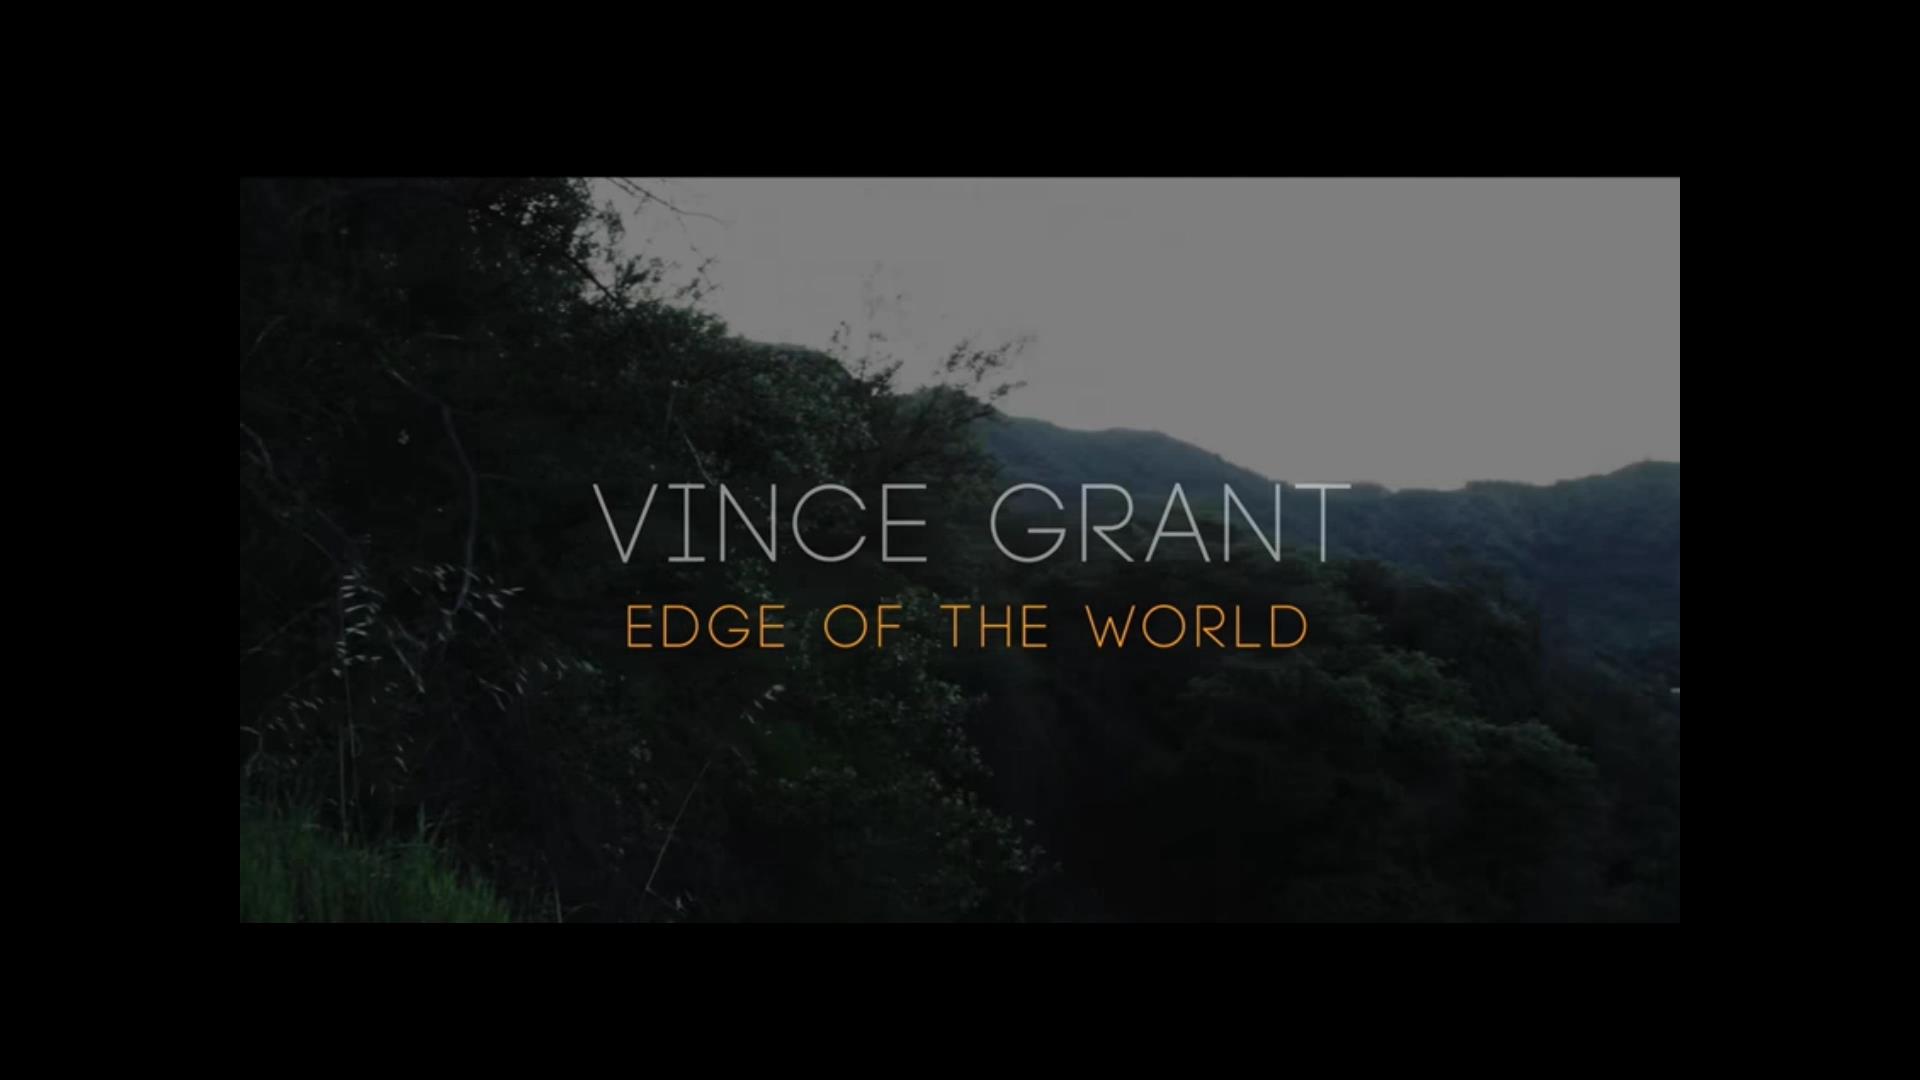  Vince Grant – “Edge Of The World”